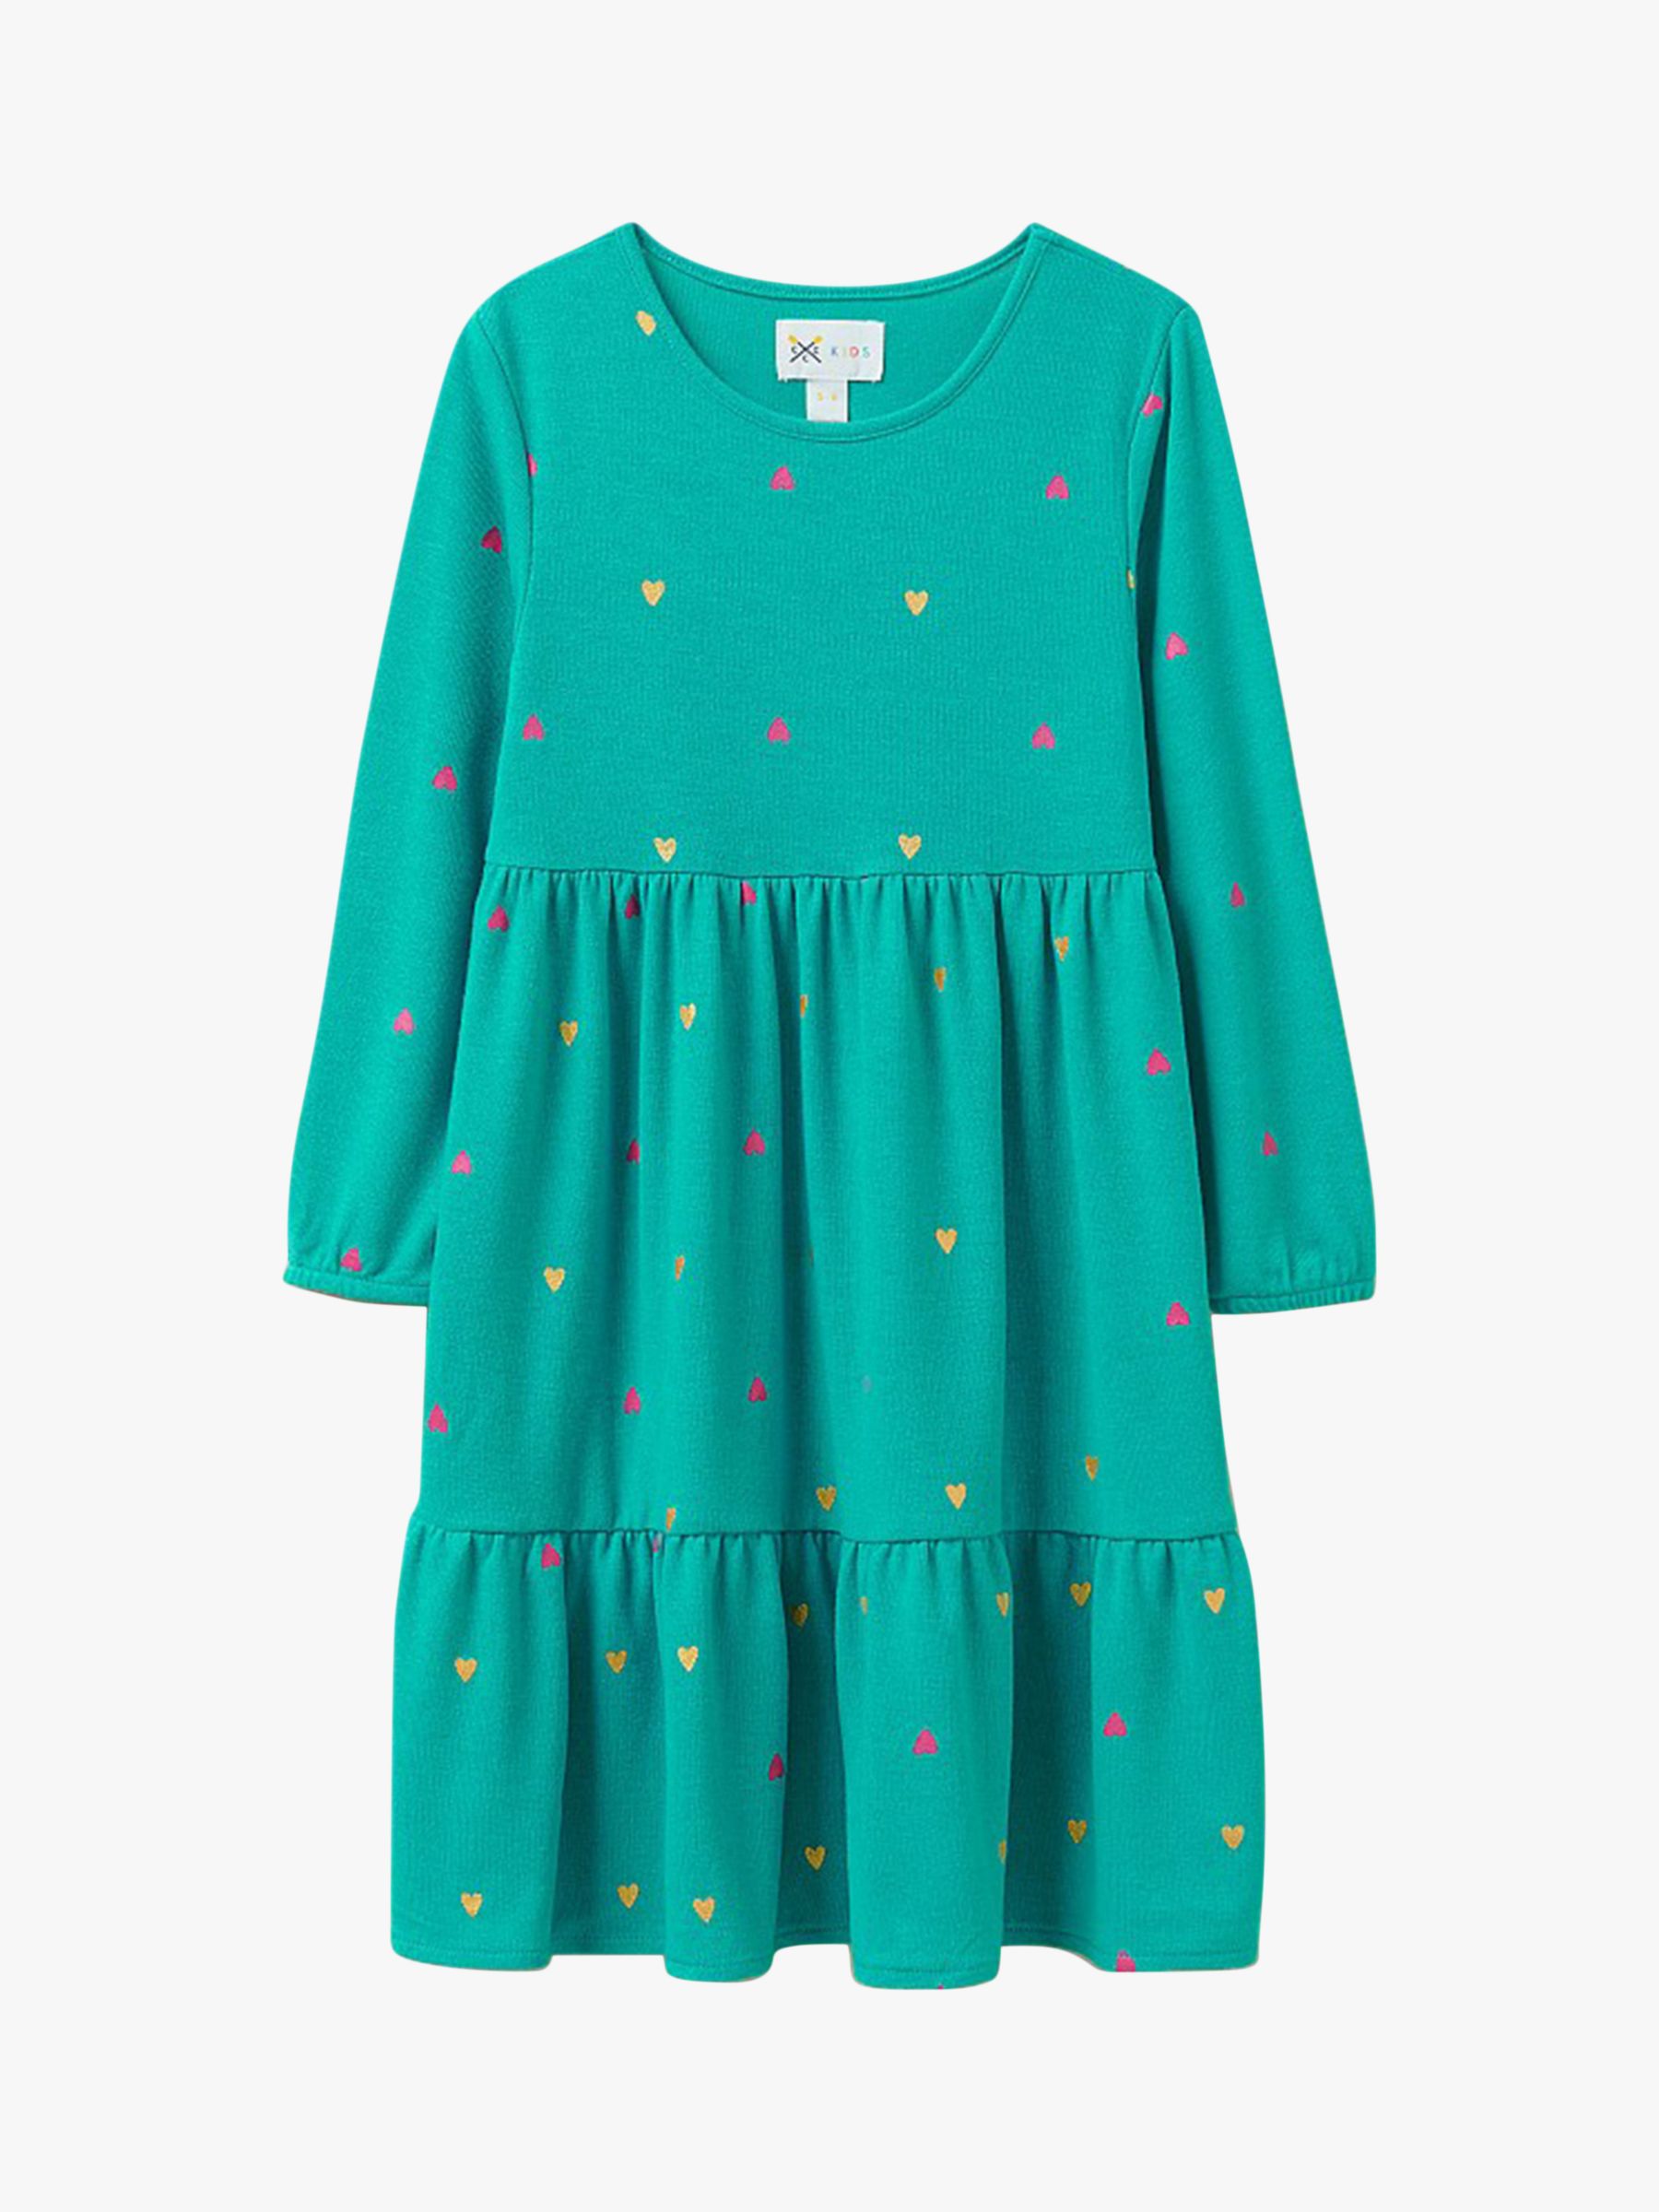 Crew Clothing Kids' Heart Print Jersey Smock Dress, Turquoise Blue